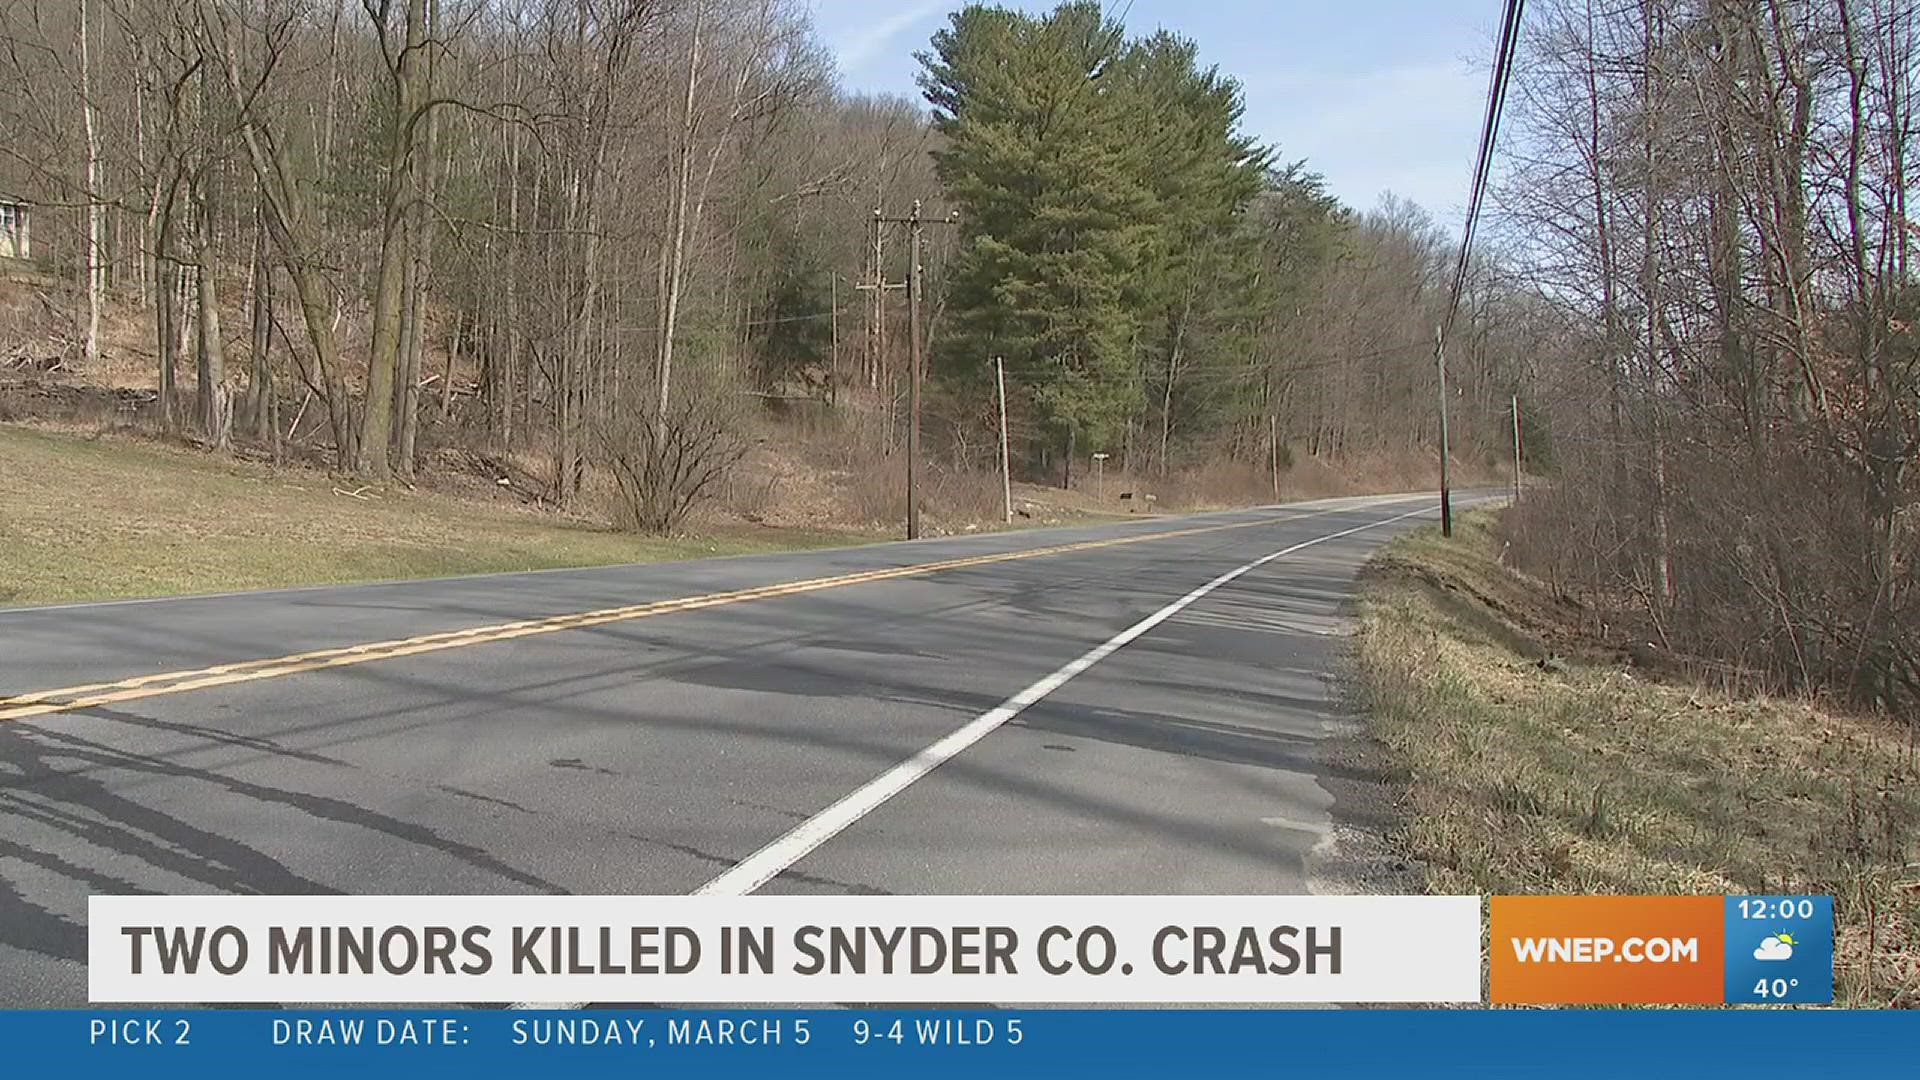 The Snyder County coroner says two minors were killed in a crash Monday morning near Middleburg.